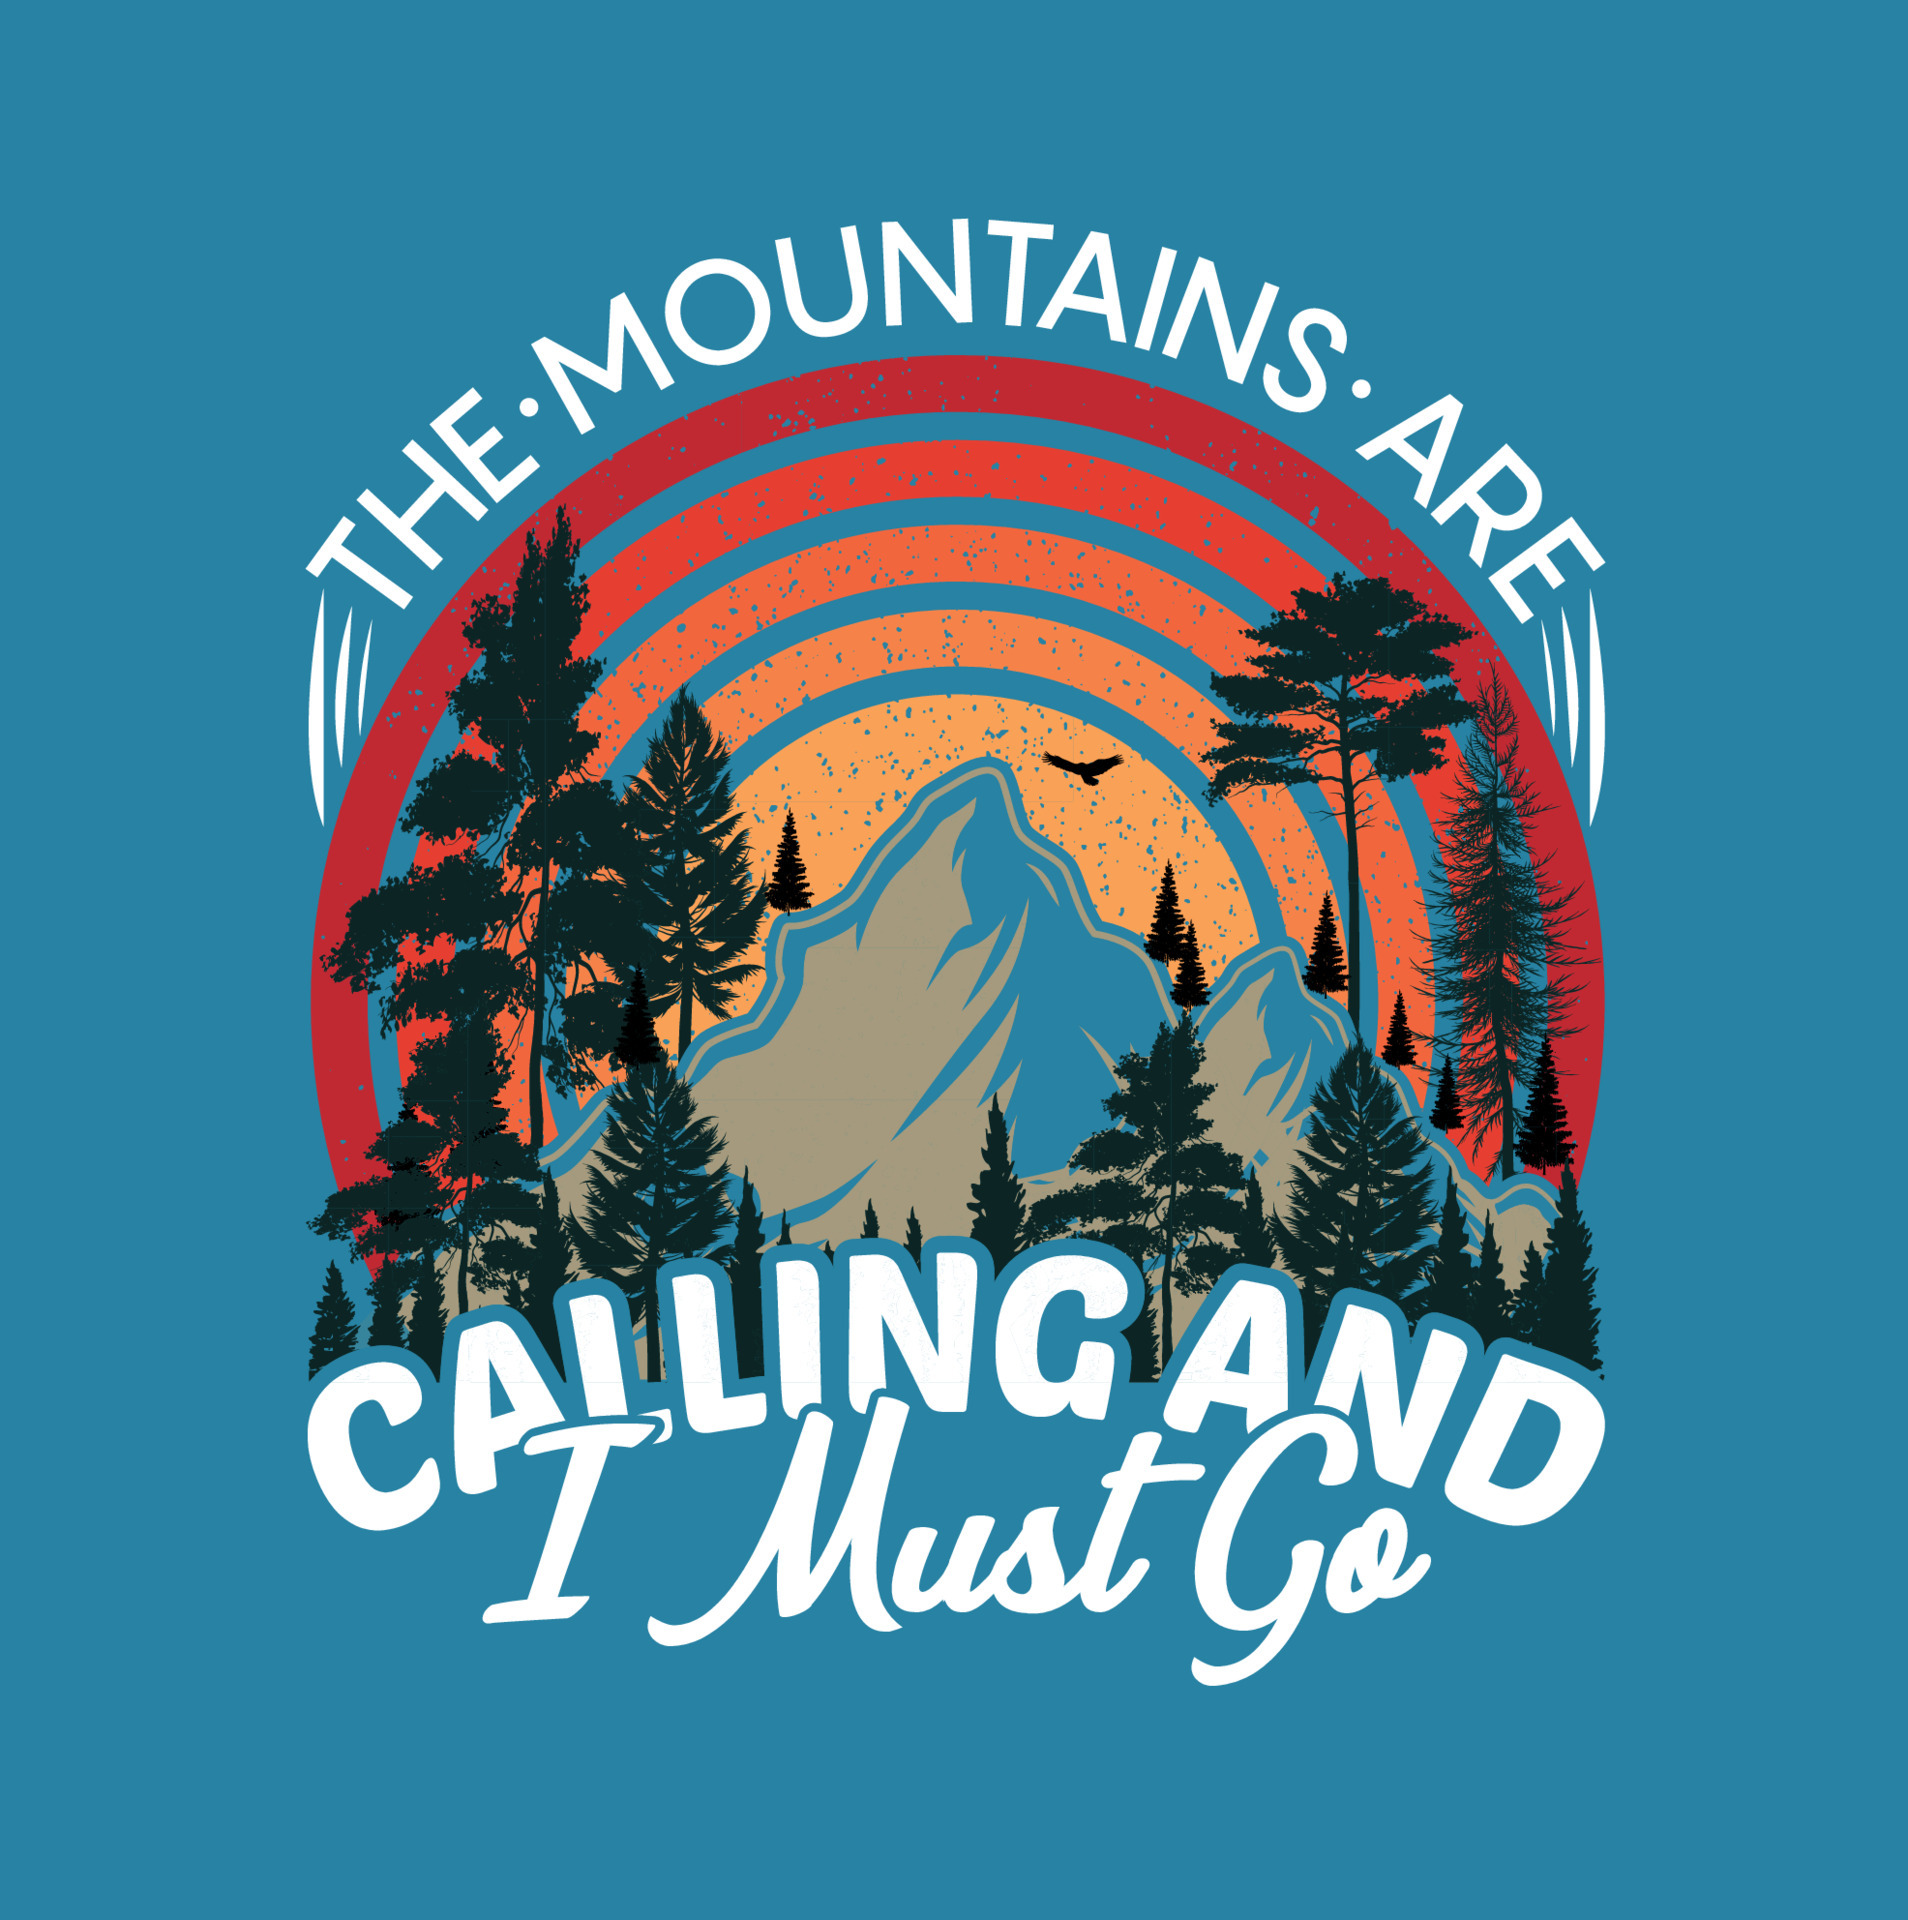 The mountains are calling and must go women's t-shirt design 6539140 Vector Art Vecteezy